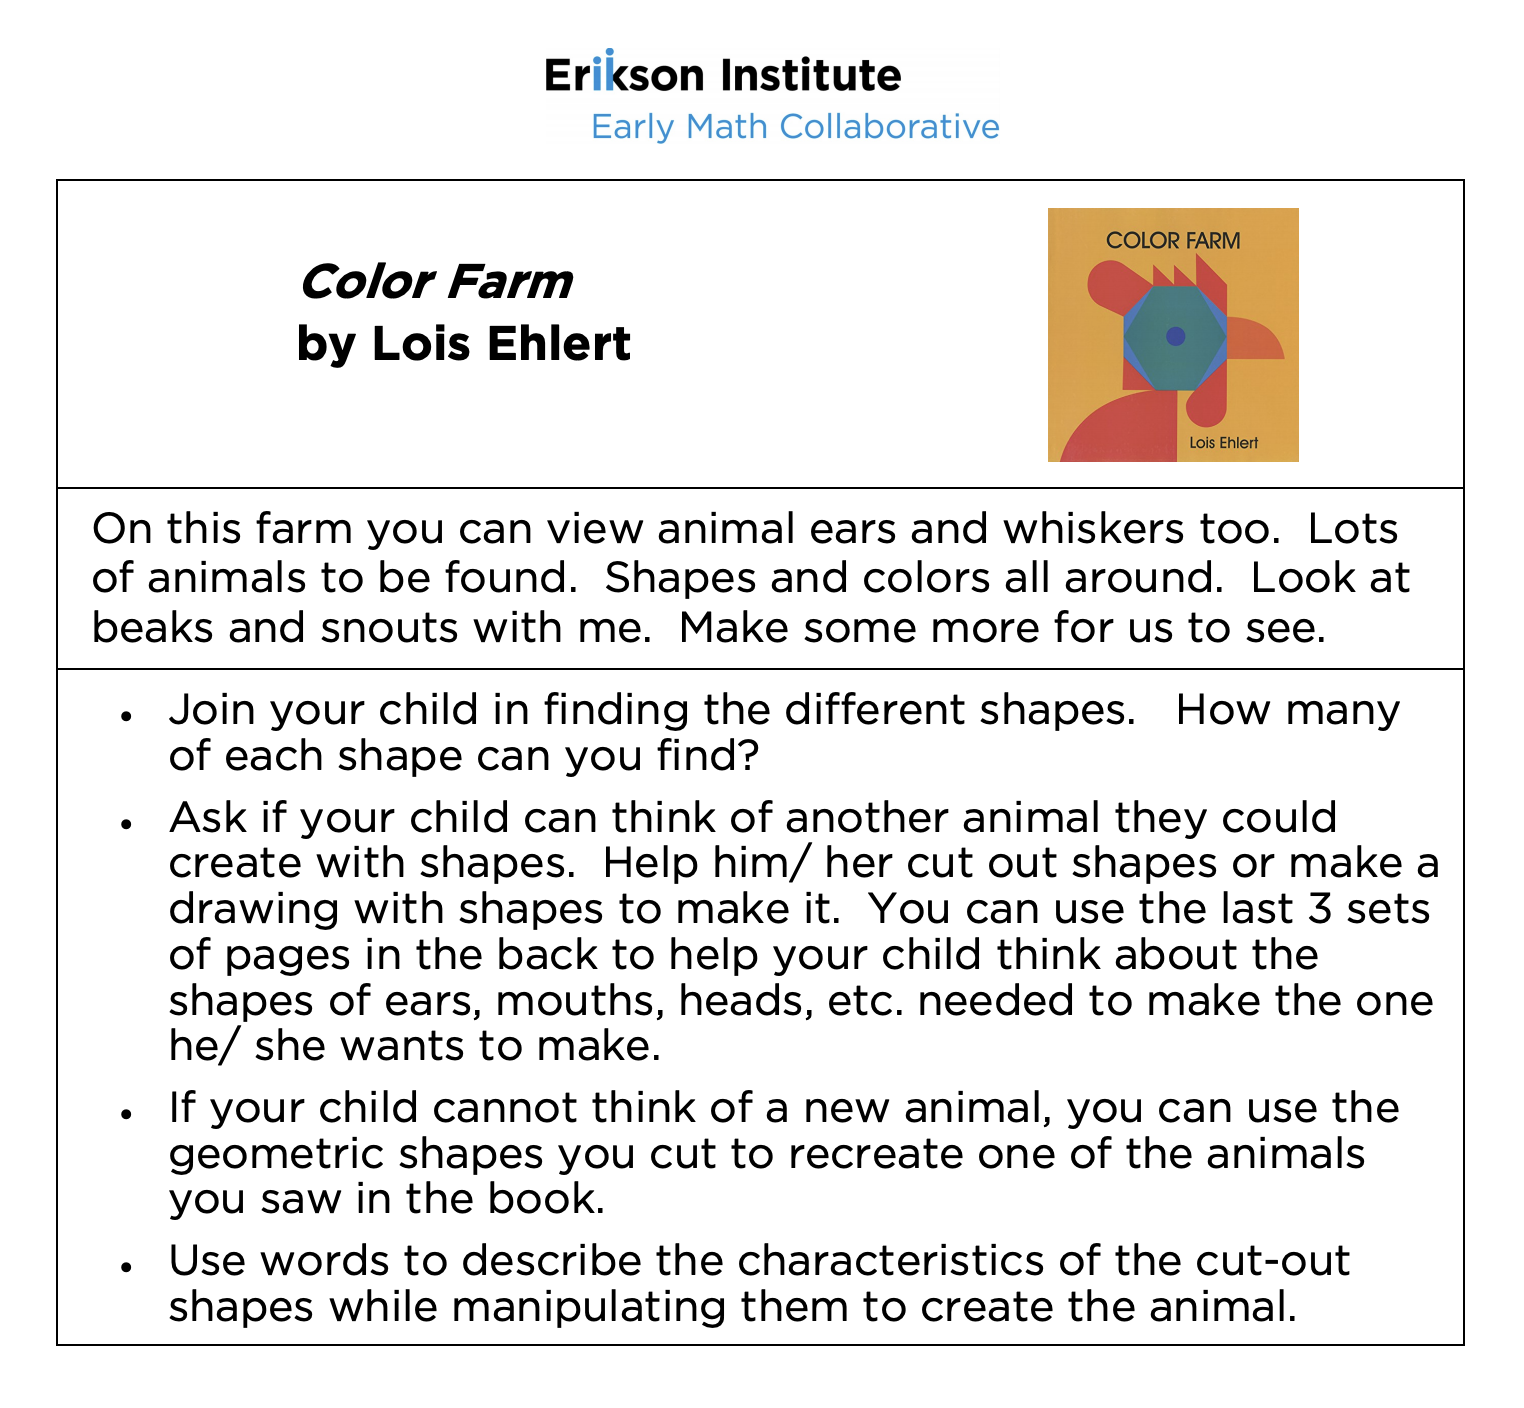 Color Farm activities, Take Home Activity Cards